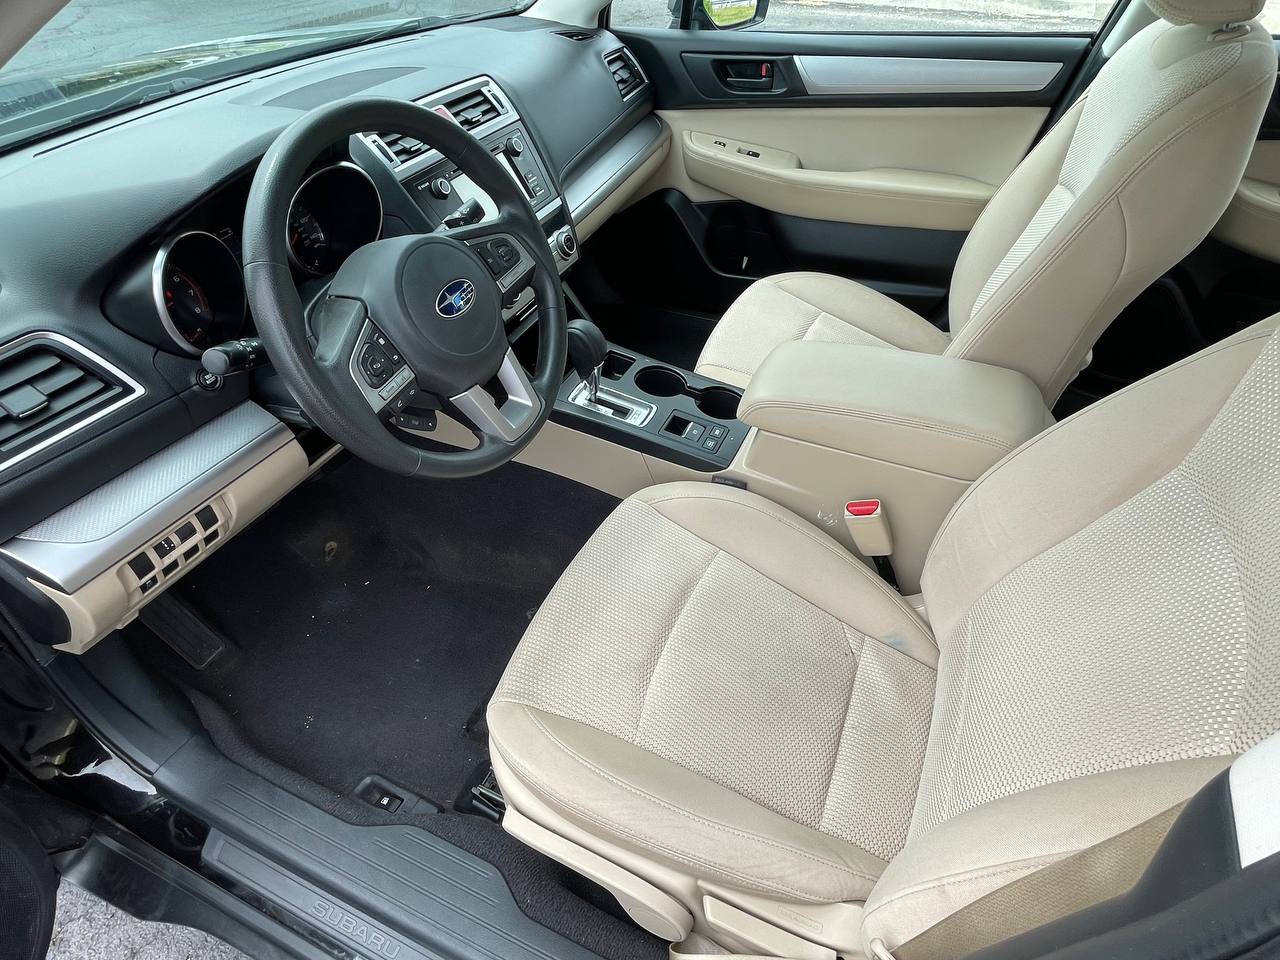 Used - Subaru Outback 2.5i AWD Wagon for sale in Staten Island NY